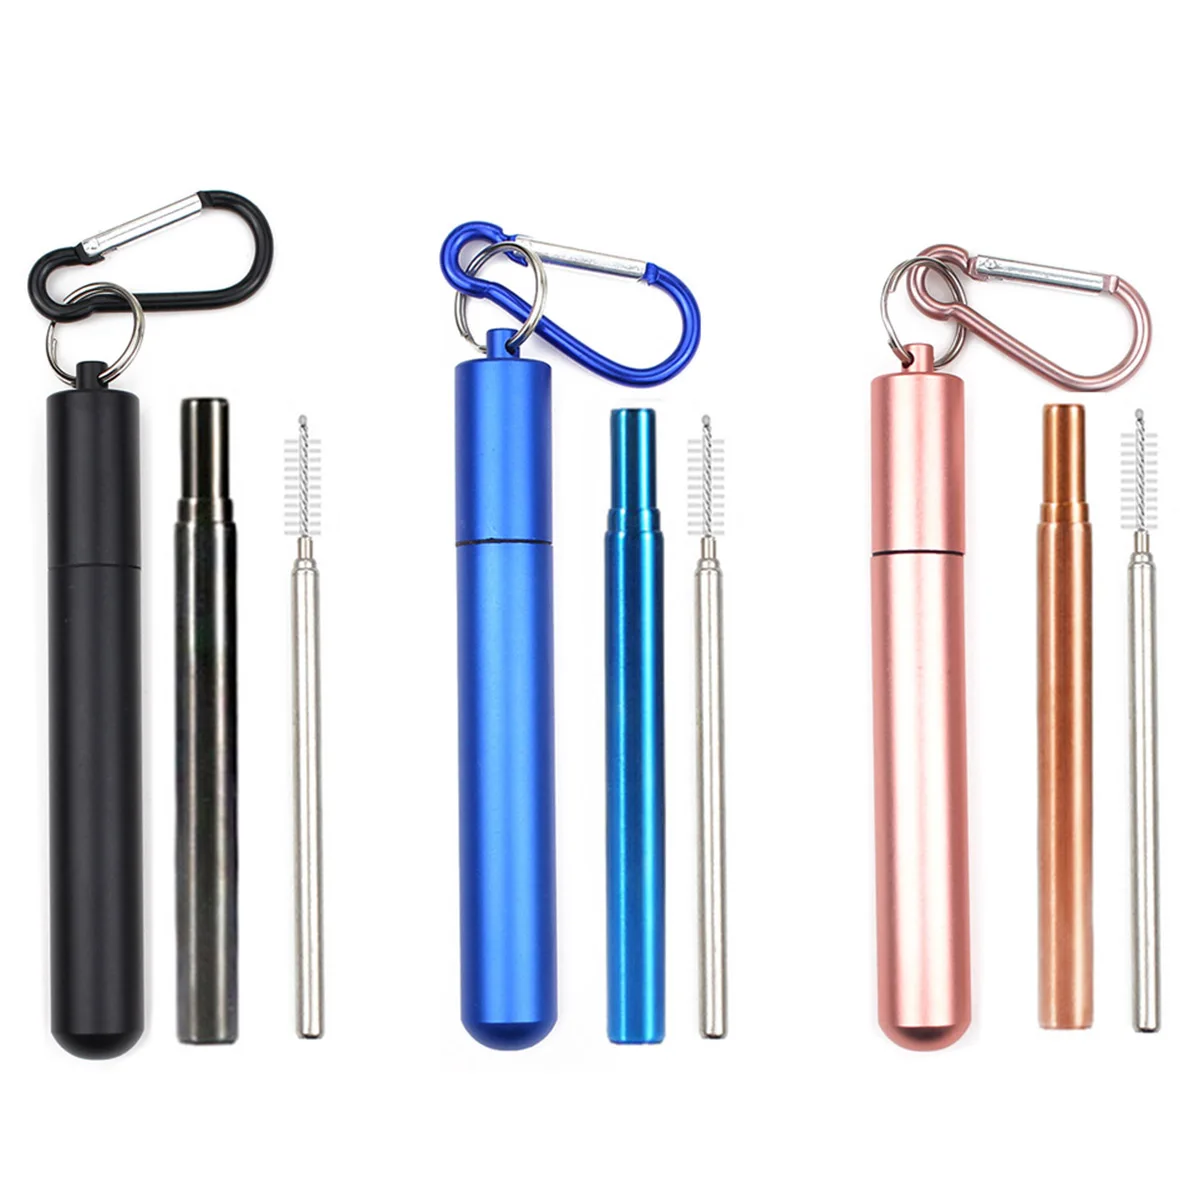 

Reusable Stainless Steel Straws with Aluminum Keychain Case Cleaning Brush Collapsible Telescopic Portable Drinking Straws